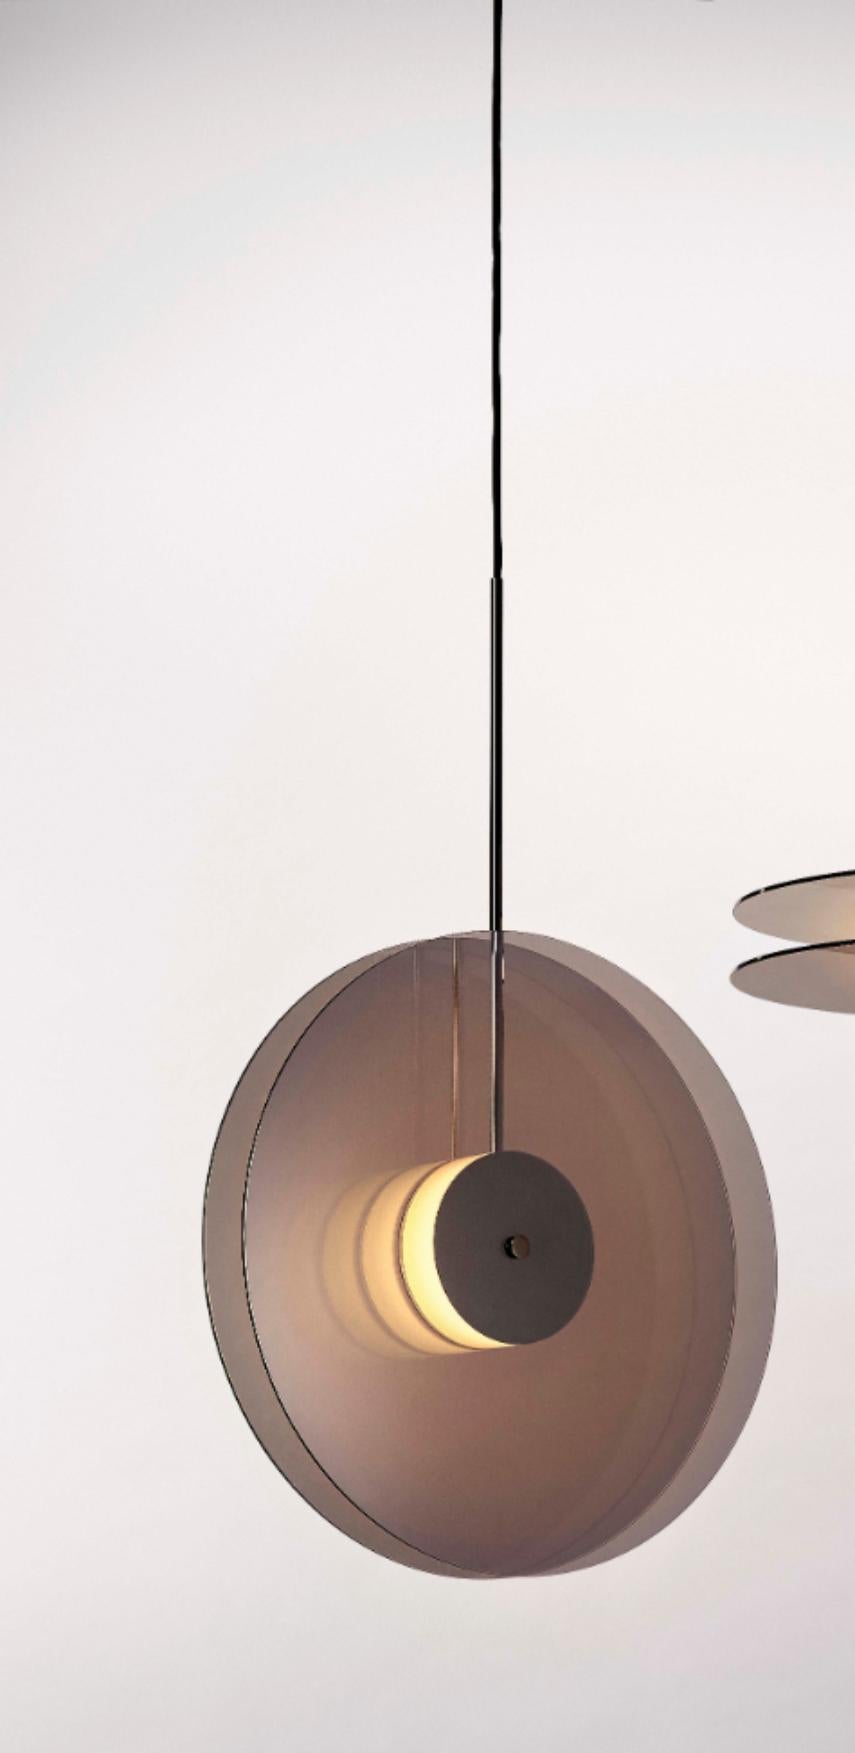 Eclipse pendant light by Dechem Studio
Dimensions: D 50 x H 200 cm
Materials: brass, glass.

Inspired by the 1930s modernist design and Art Deco, Eclipse lamp is comprised of two metallized glass discs with a source of soft light behind the